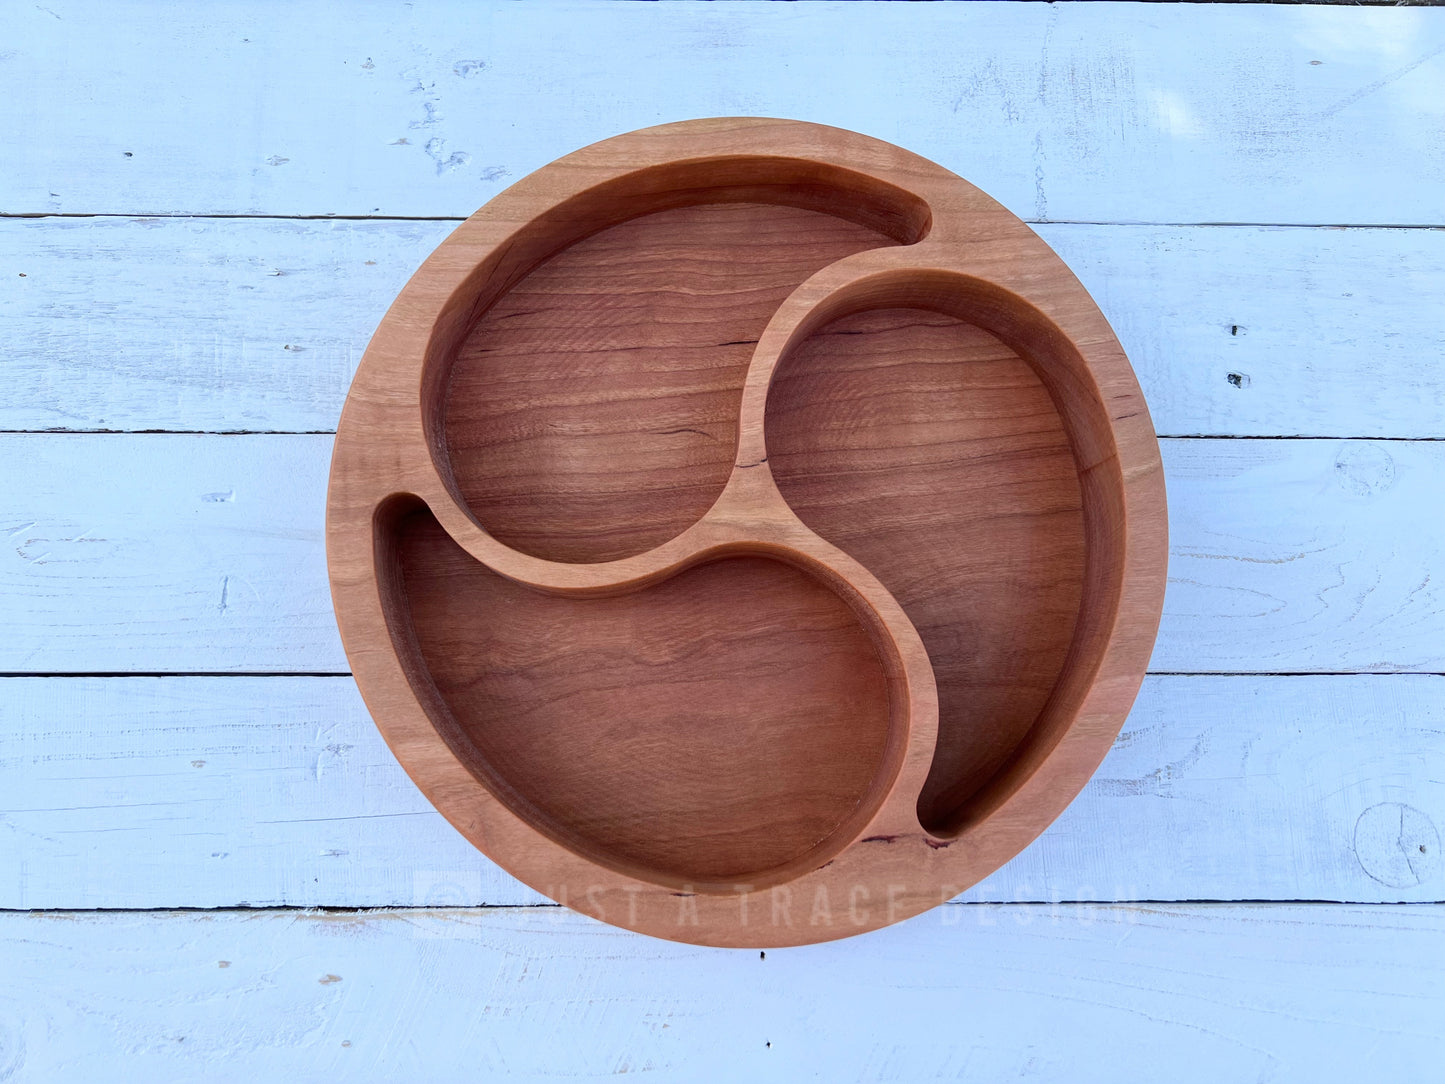 Wooden 3 Section Snack Tray, Grazing Board, Appetizer Tray, Ying Yang Wood Platter, Serving Tray, Nut Dish, Candy Dish, Nut Tray, Serving Platter